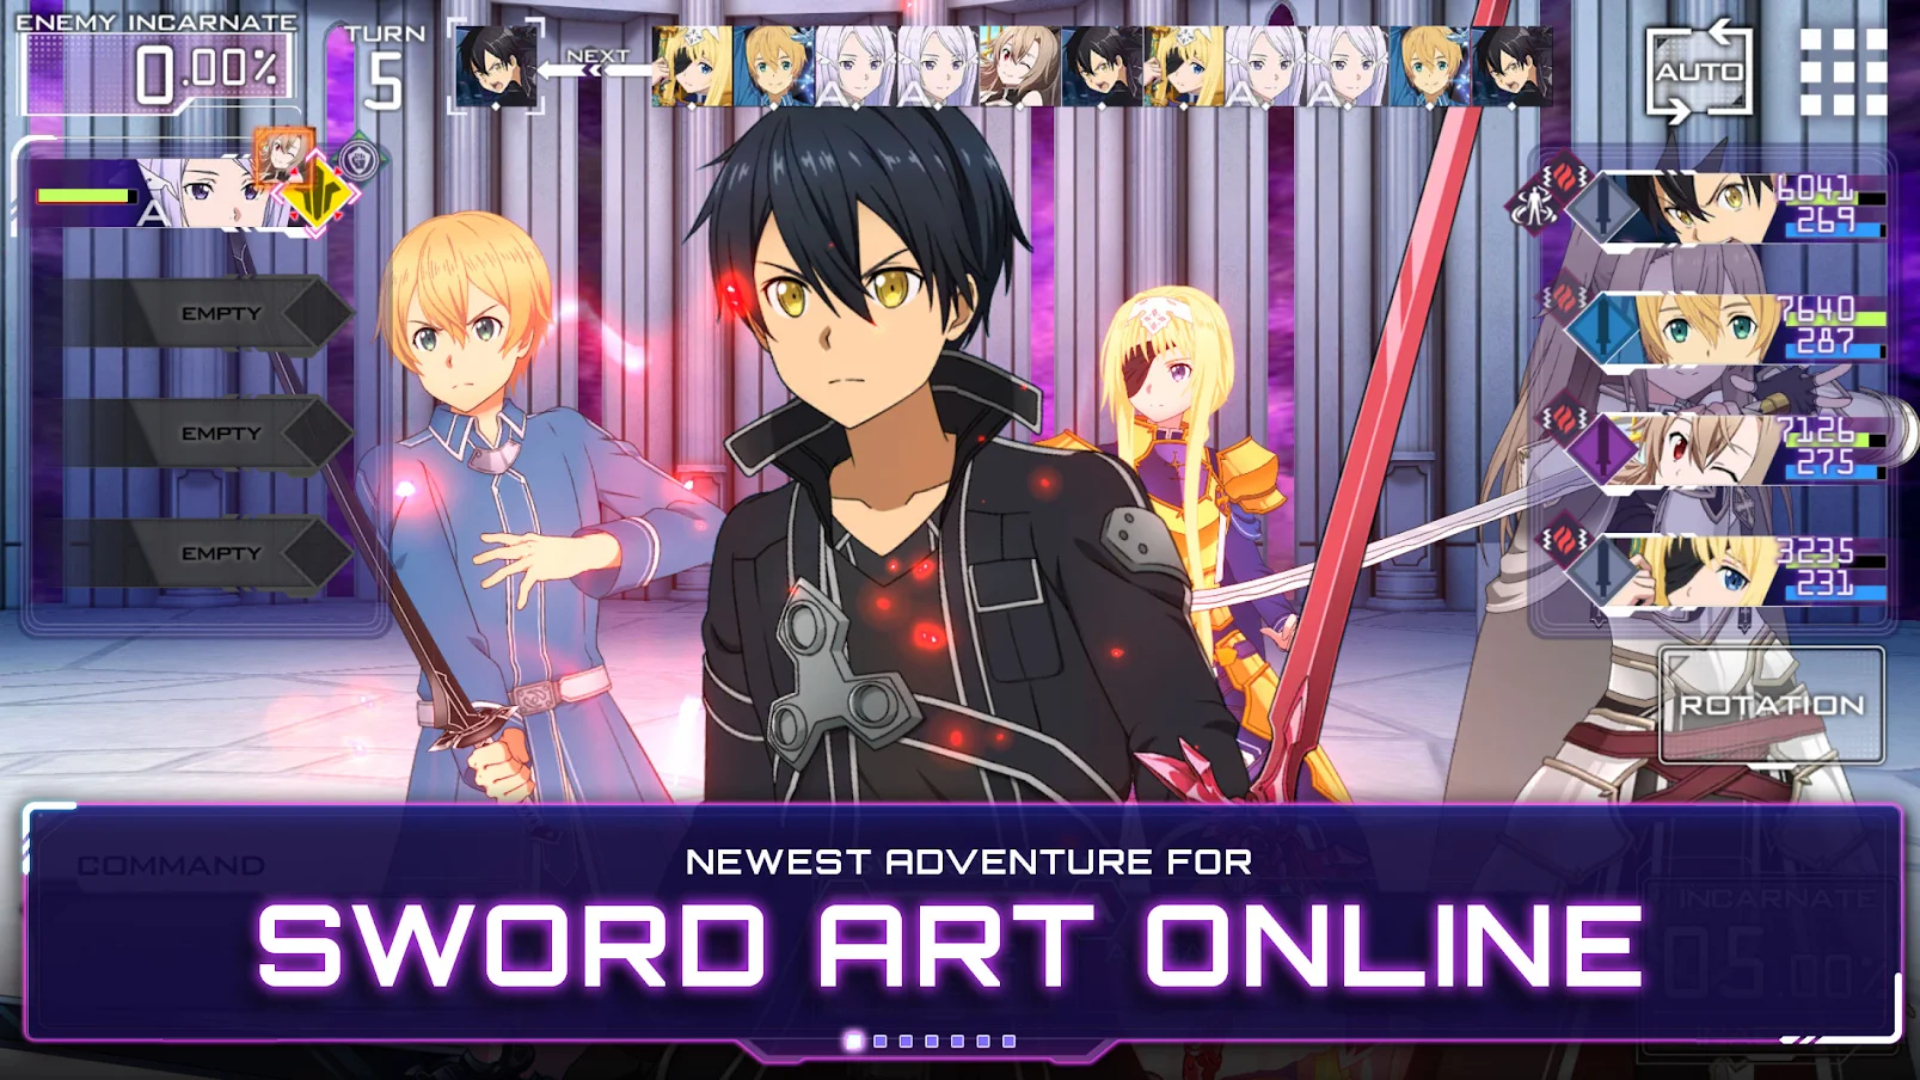 This new sword art online game on roblox is one of the best